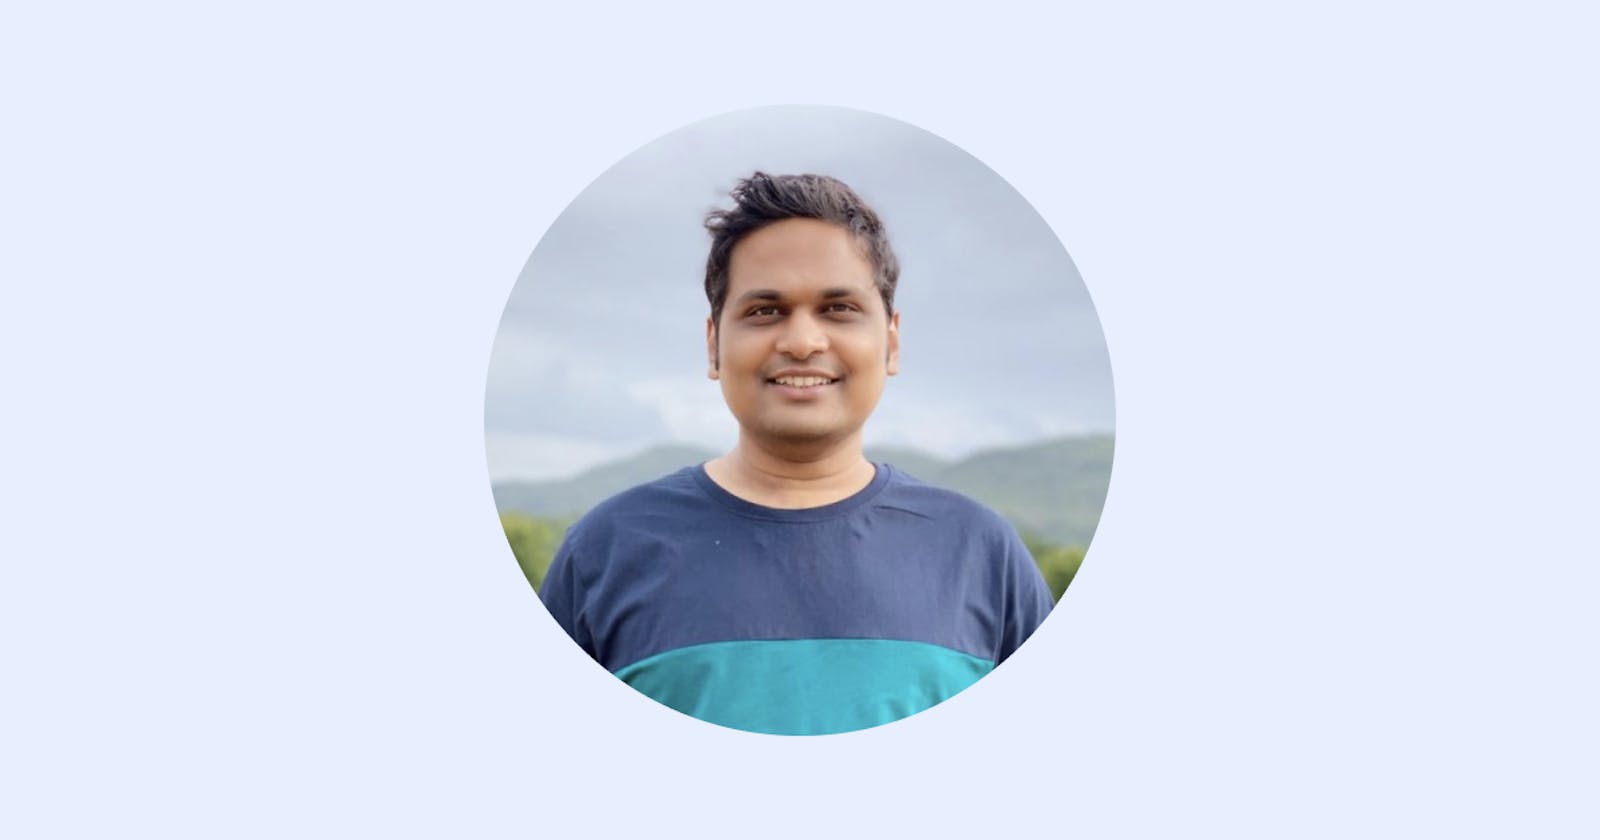 I am helping thousands of dev bloggers attain creative freedom with Hashnode. I am Sandeep Panda, ask me anything!